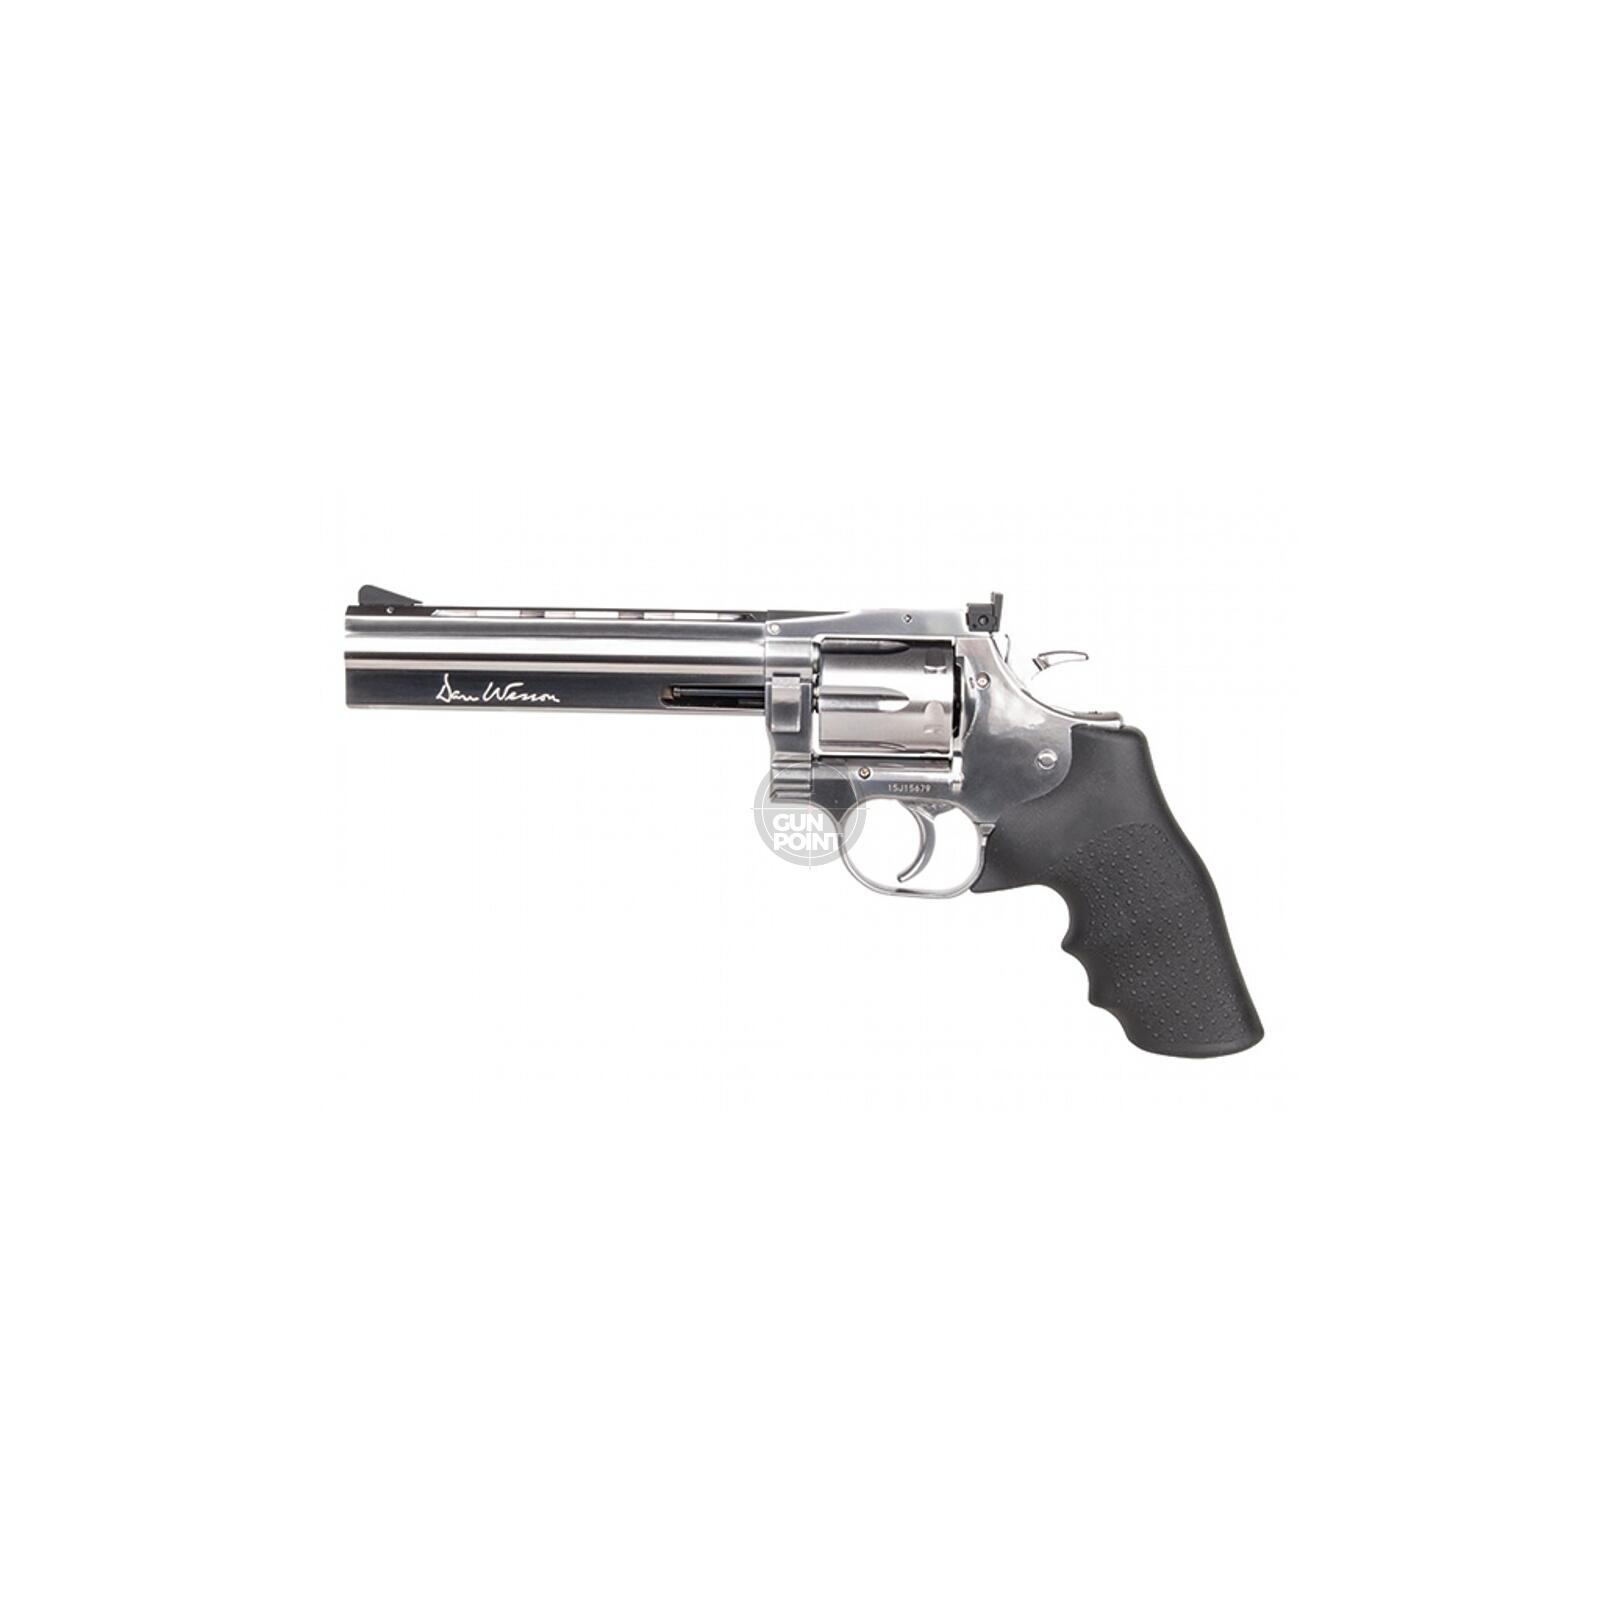 Luftpistole - Dan Wesson 715 6 Co2-System NBB Silber - Kal. 4,5 mm